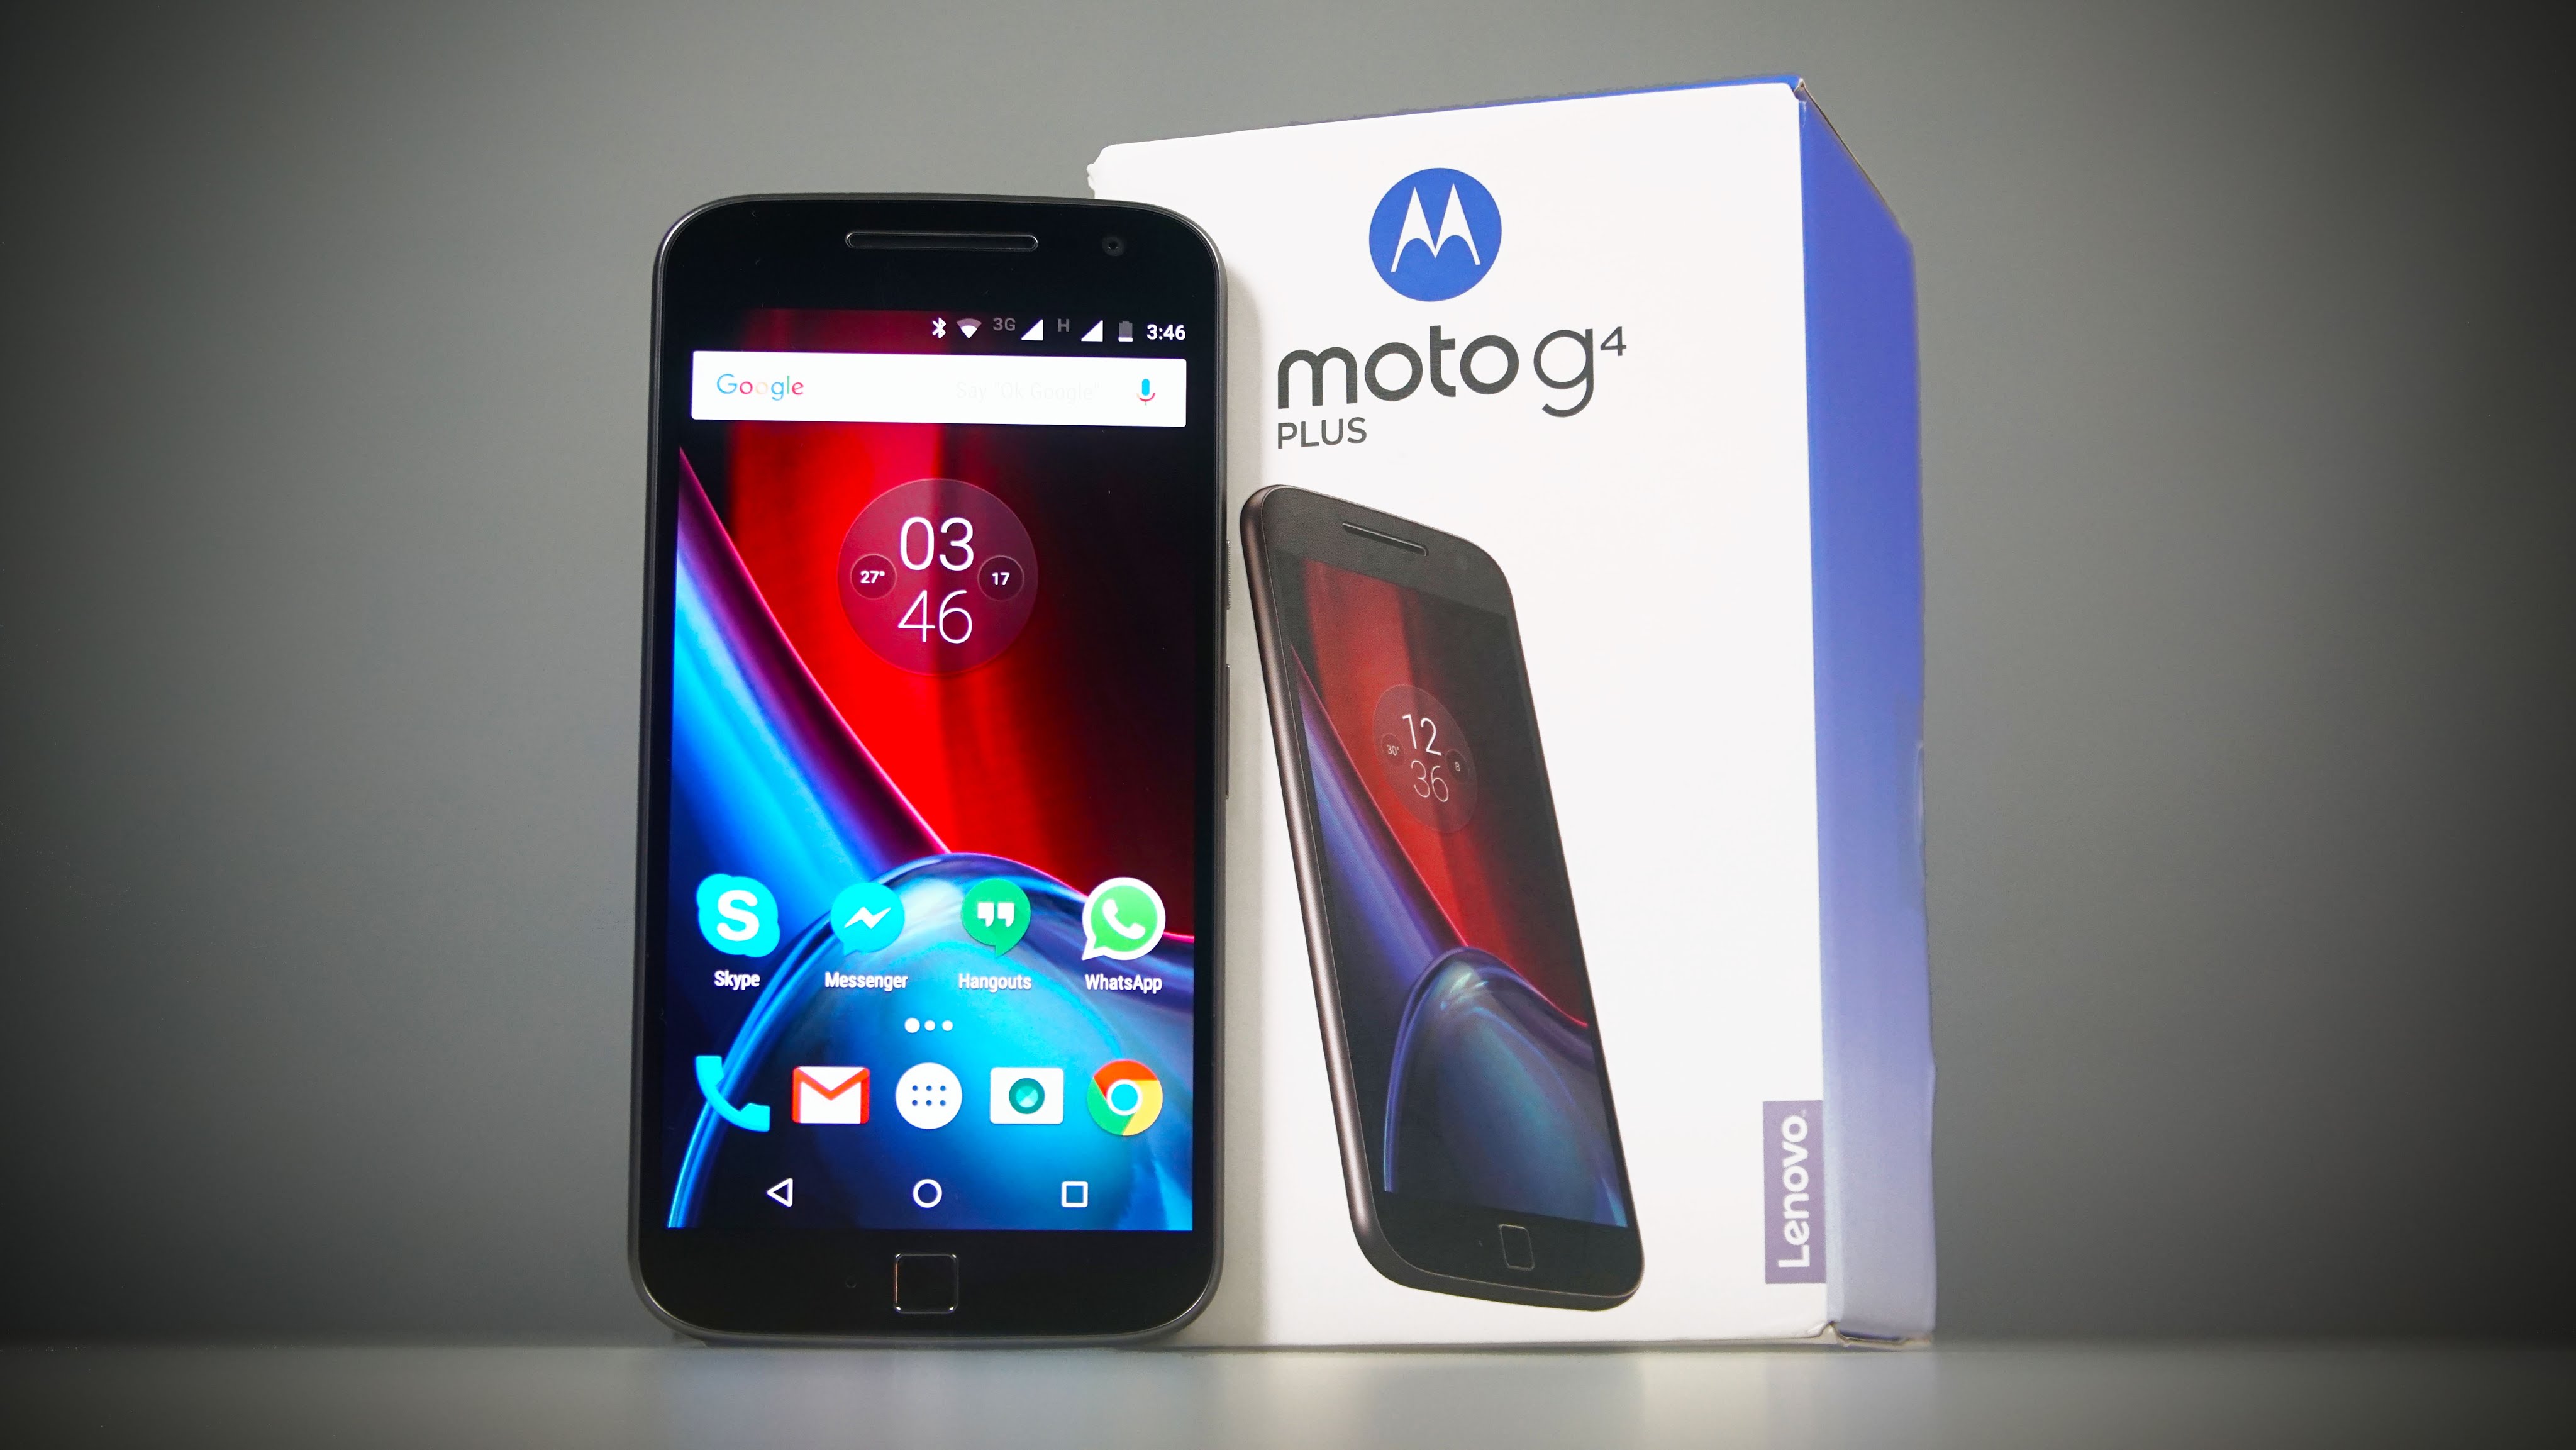 Turns out Moto G4 Plus will get Android Oreo after all